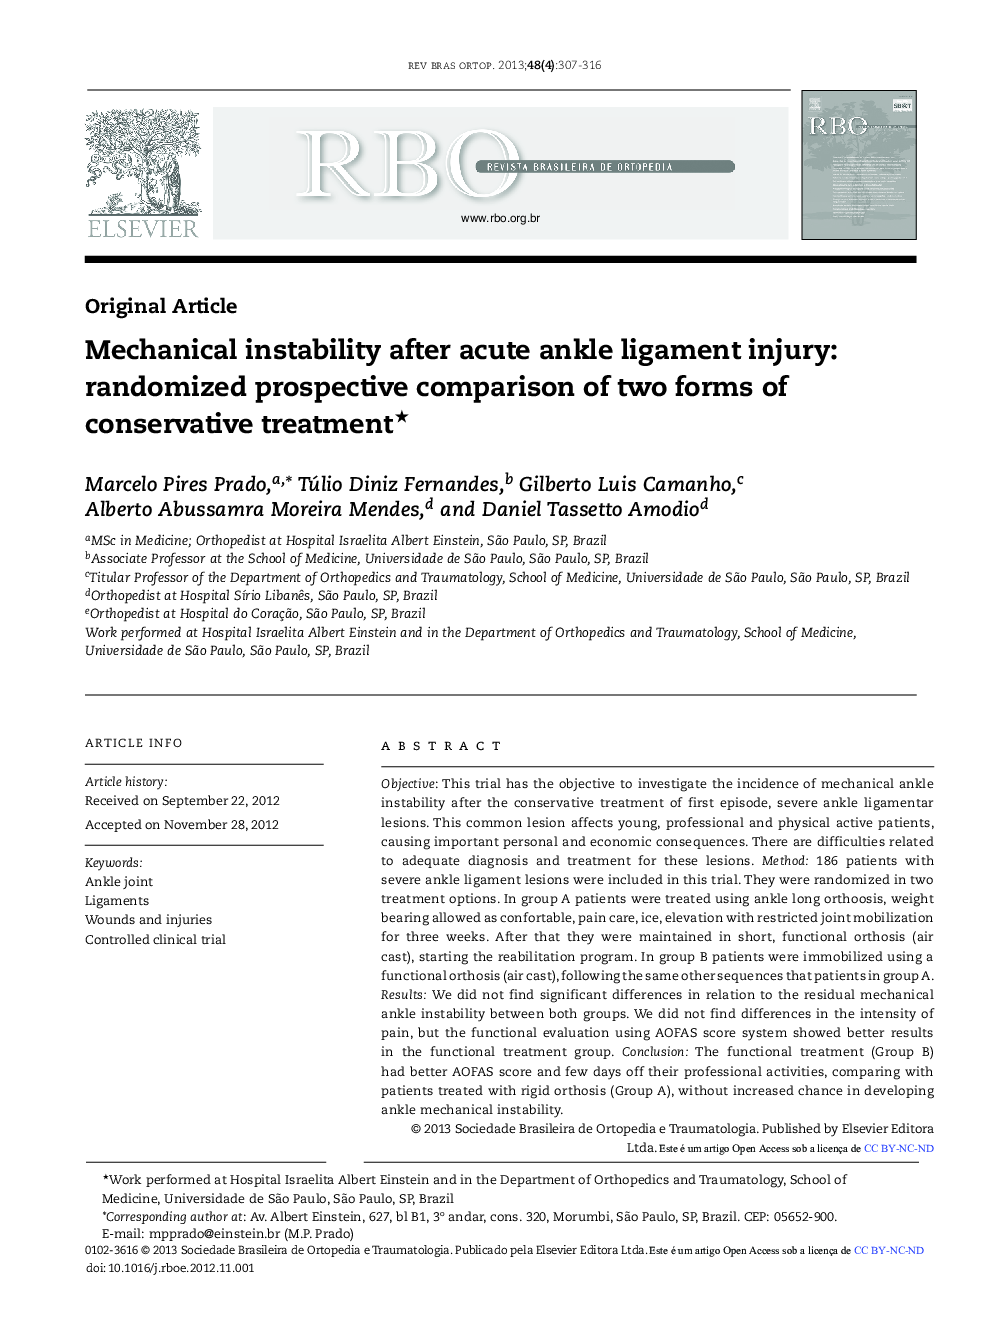 Mechanical instability after acute ankle ligament injury: randomized prospective comparison of two forms of conservative treatment 